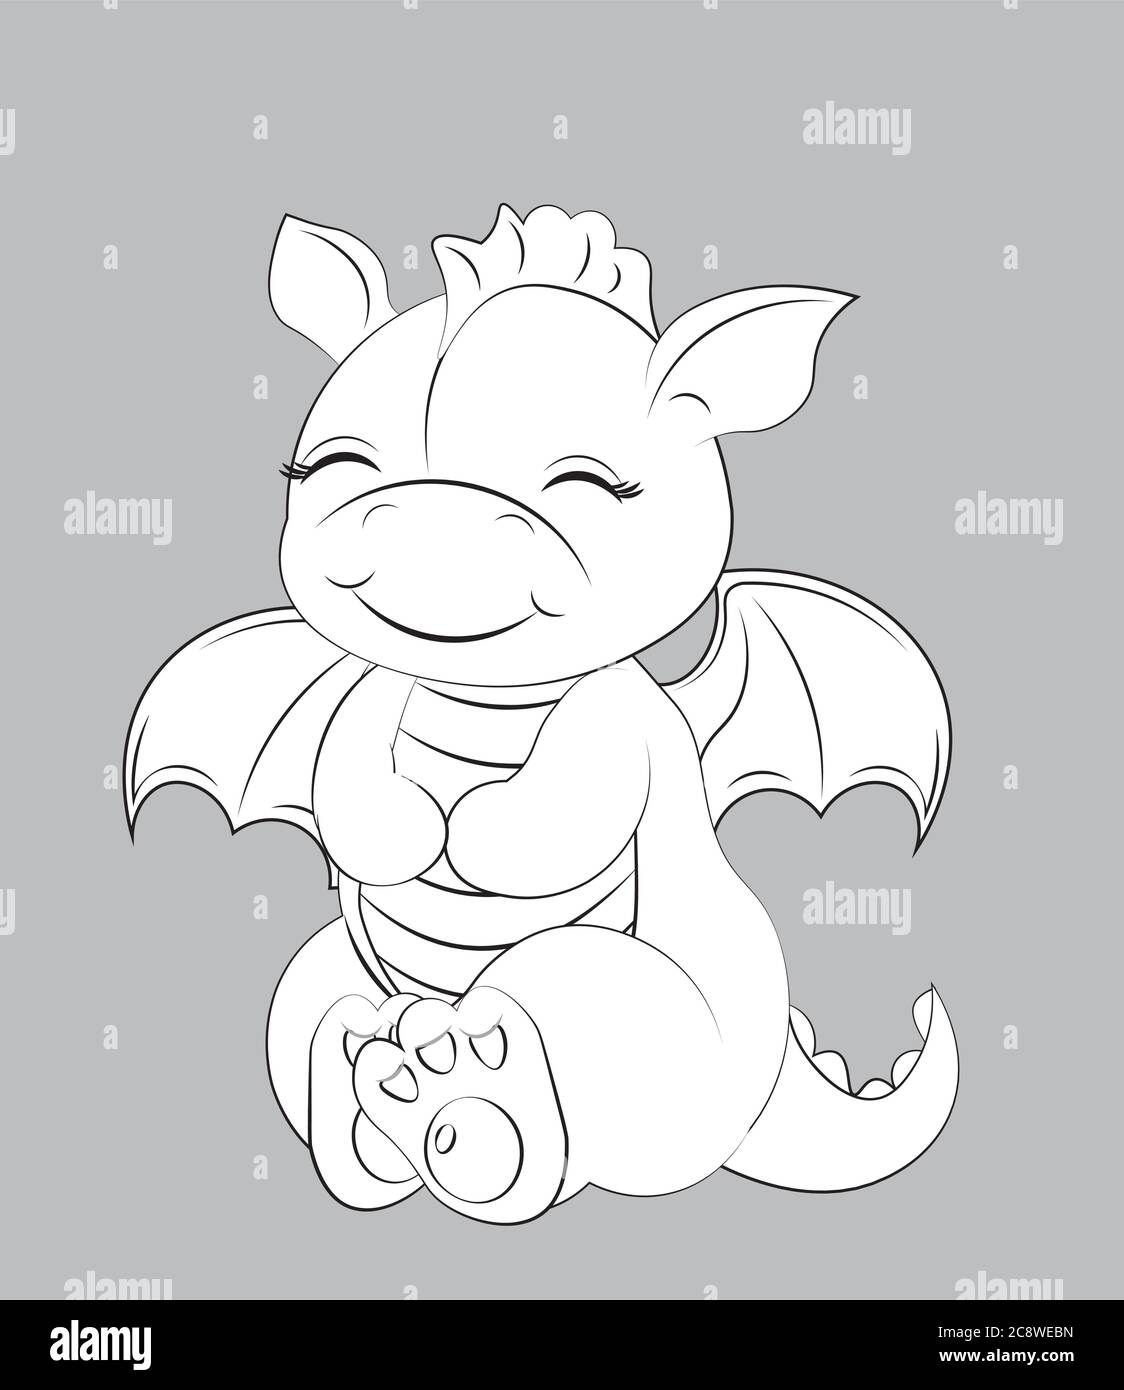 Cute Baby Dragon Coloring Book Picture In Hand Drawing Cartoon Style For T Shirt Wear Fashion Print Design Greeting Card Postcard Baby Shower Pa Stock Vector Image Art Alamy